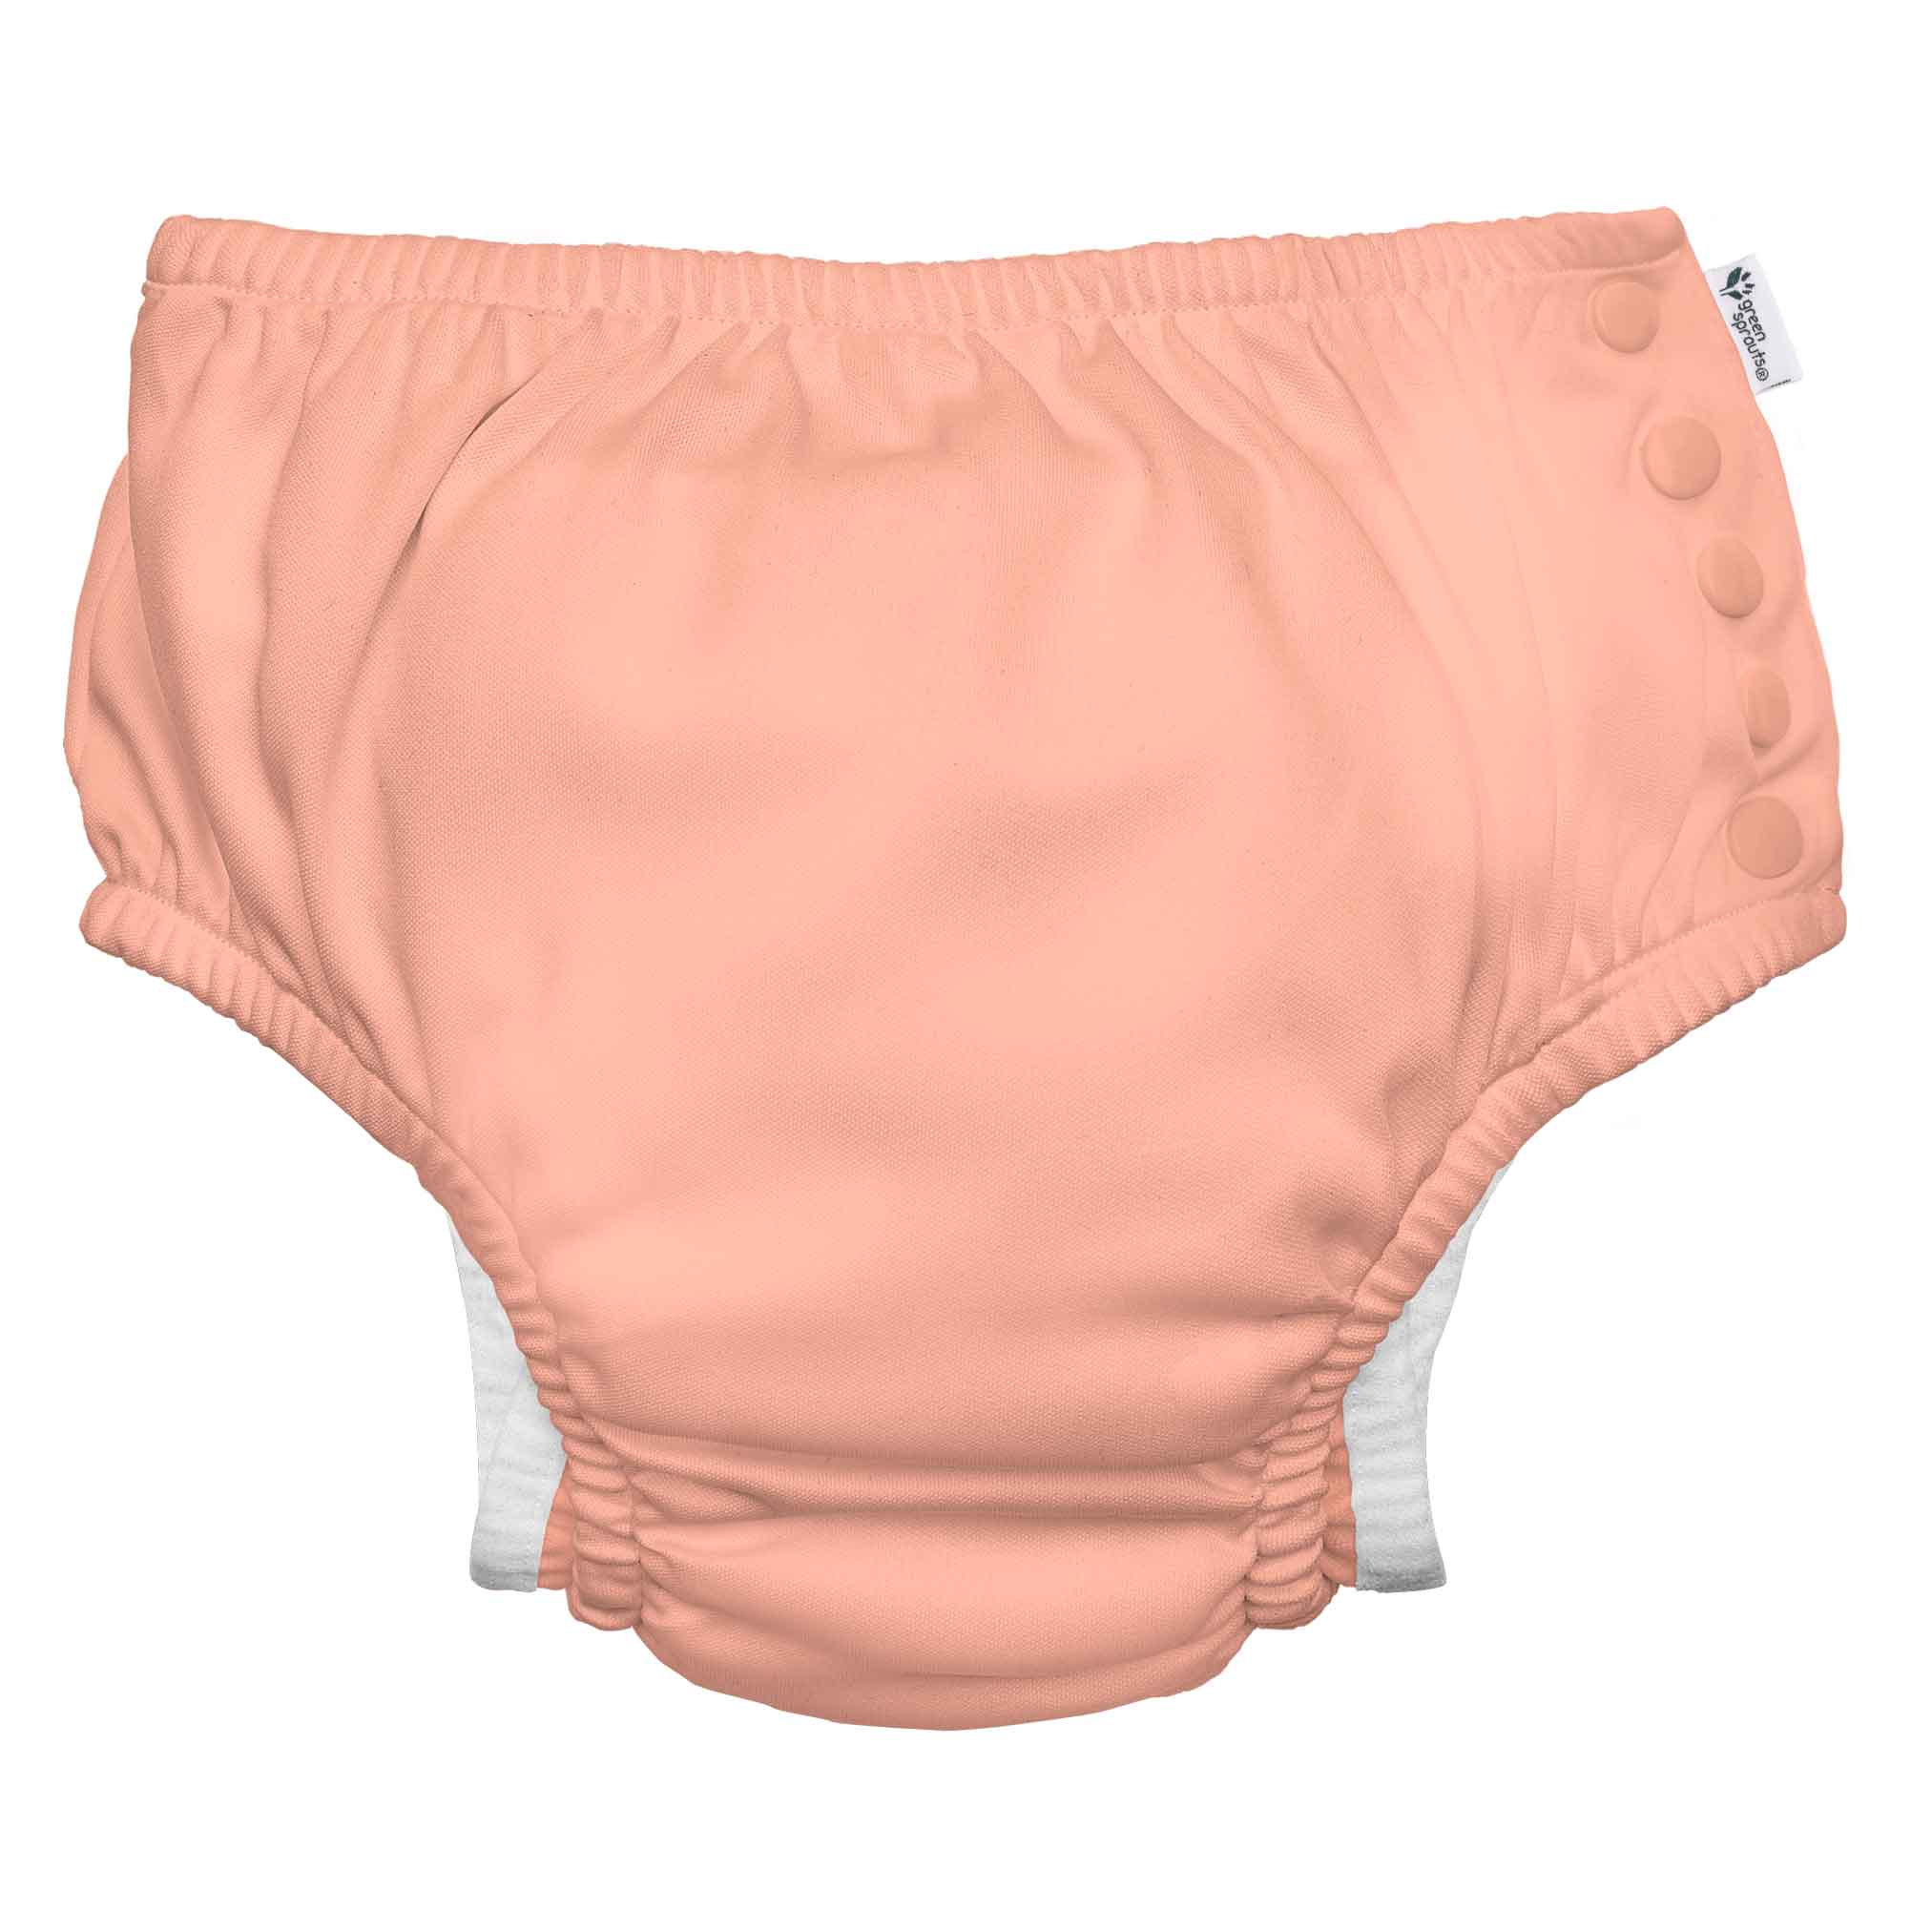 Experience stress-free, mess-free swimming with the Eco Snap Swim Diaper! This reusable diaper boasts UPF 50+ sun protection, leak-proof design, and easy on/off convenience. Made with recycled materials and Oeko-Tex certified for safety, it's perfect for eco-conscious parents and active little ones. Available in adorable solid colors, choose the perfect one for your child! Give your child a happy & safe swim experience - order yours today!